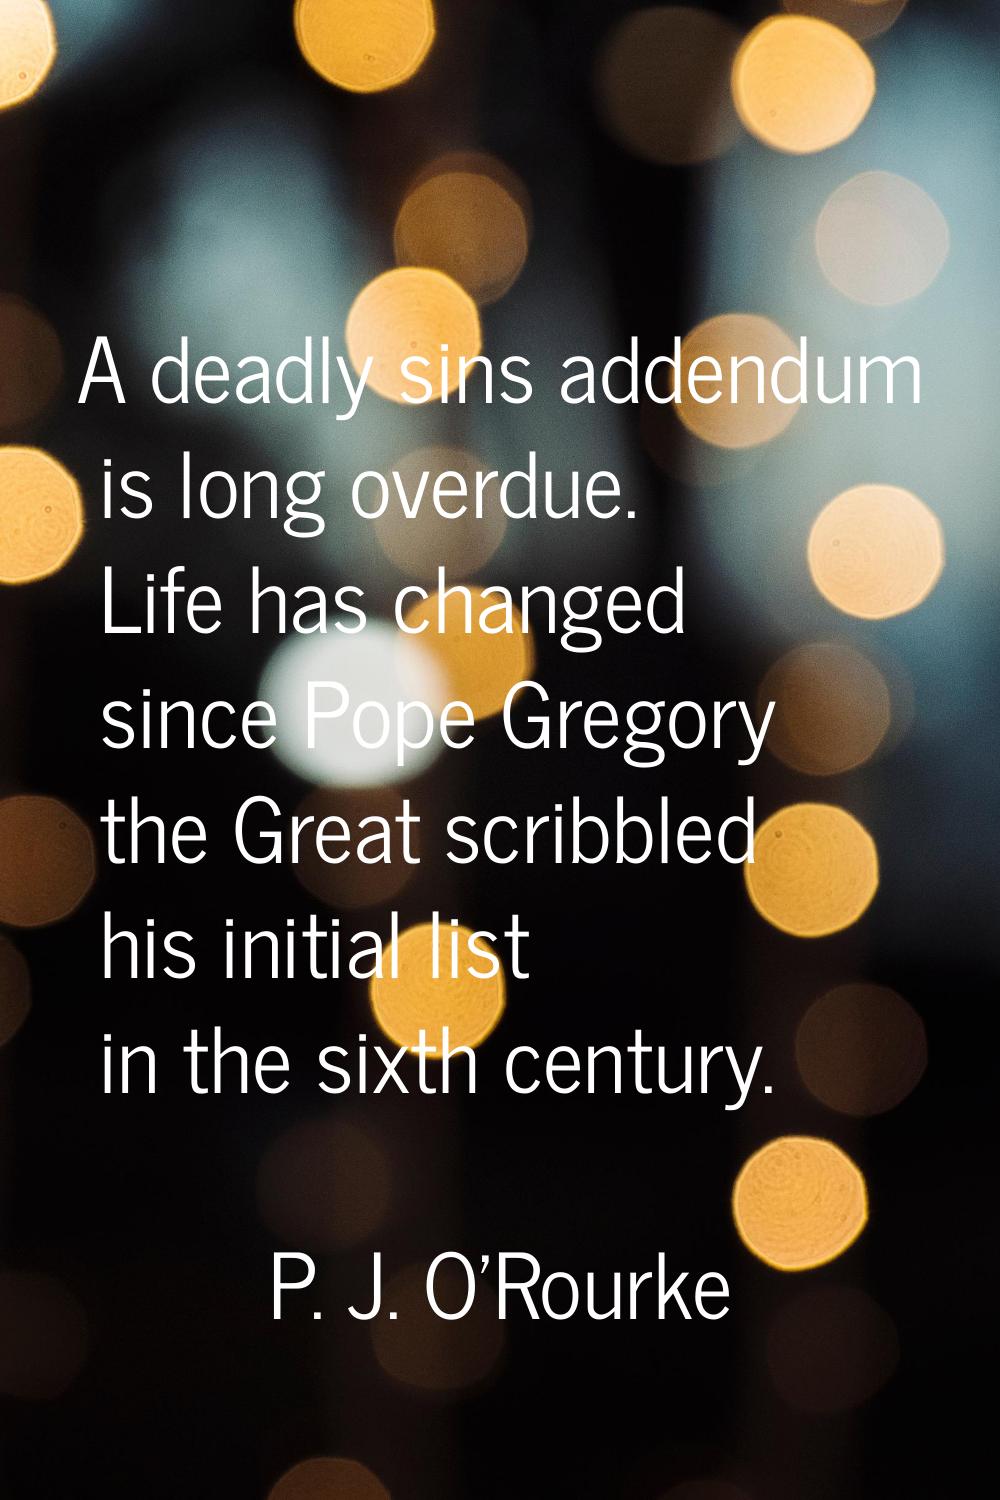 A deadly sins addendum is long overdue. Life has changed since Pope Gregory the Great scribbled his